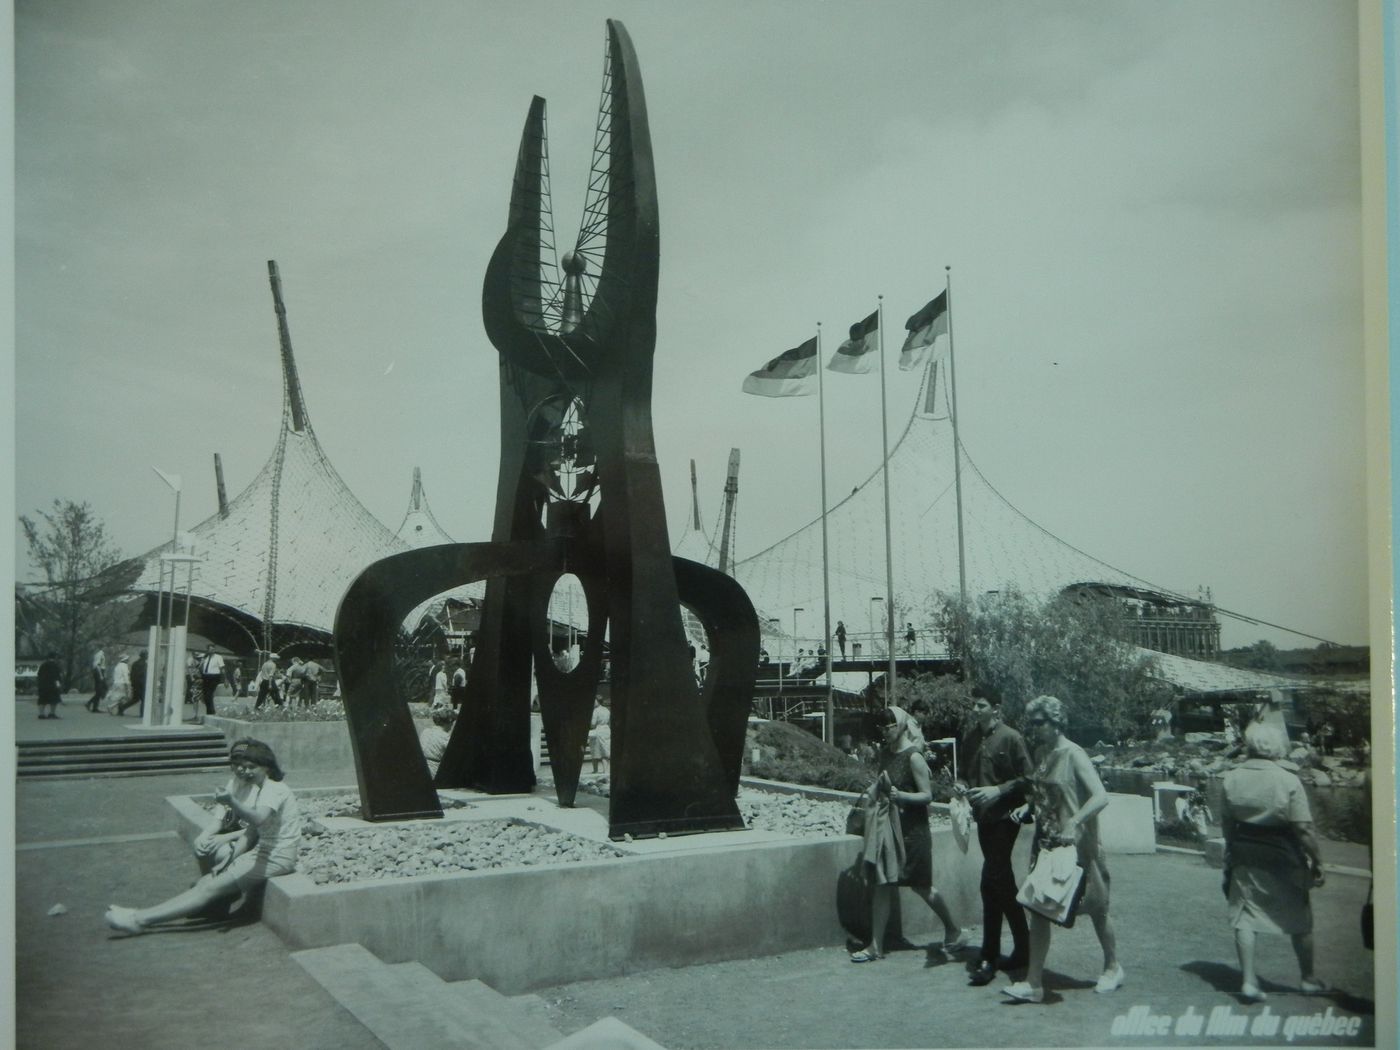 View of the sculpture 'Transcendence' by Walter Führer with the German Pavilion in background, Expo 67, Montréal, Québec